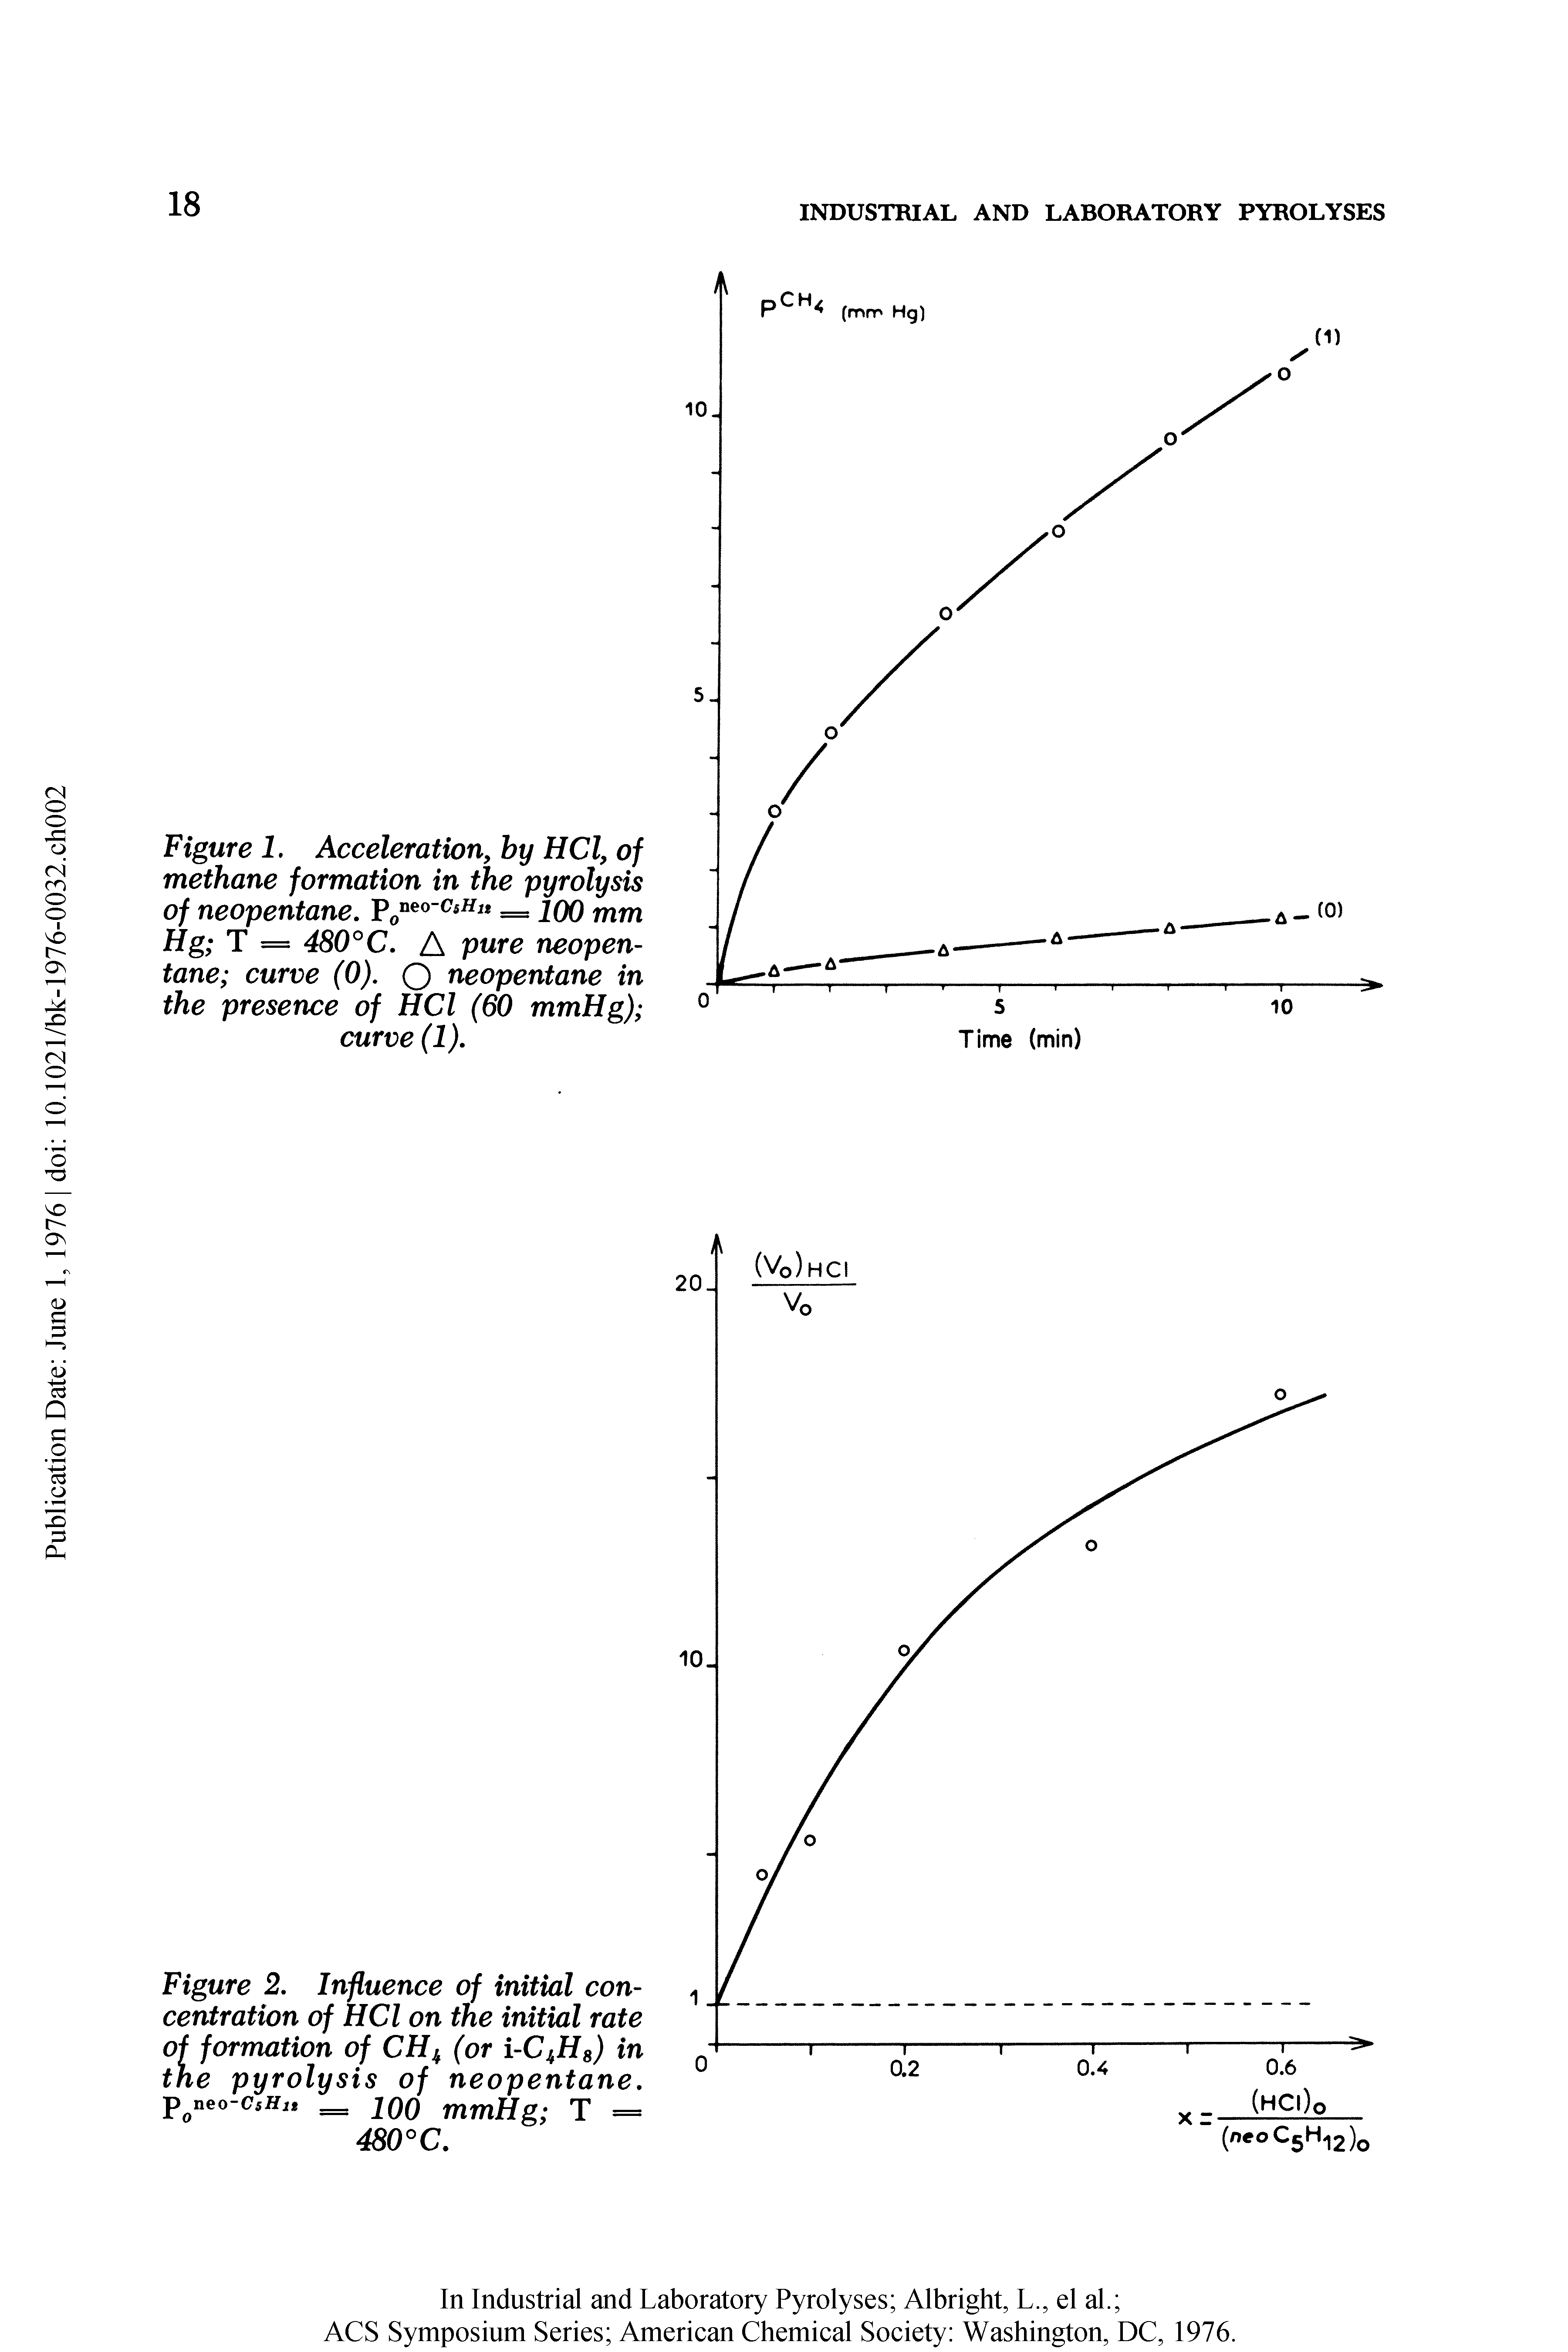 Figure 2. Influence of initial concentration of HCl on the initial rate of formation of CH (or i-C Hg) in the pyrolysis of neopentane. -p neo-csHit iQQ mmHg T = 480°C.